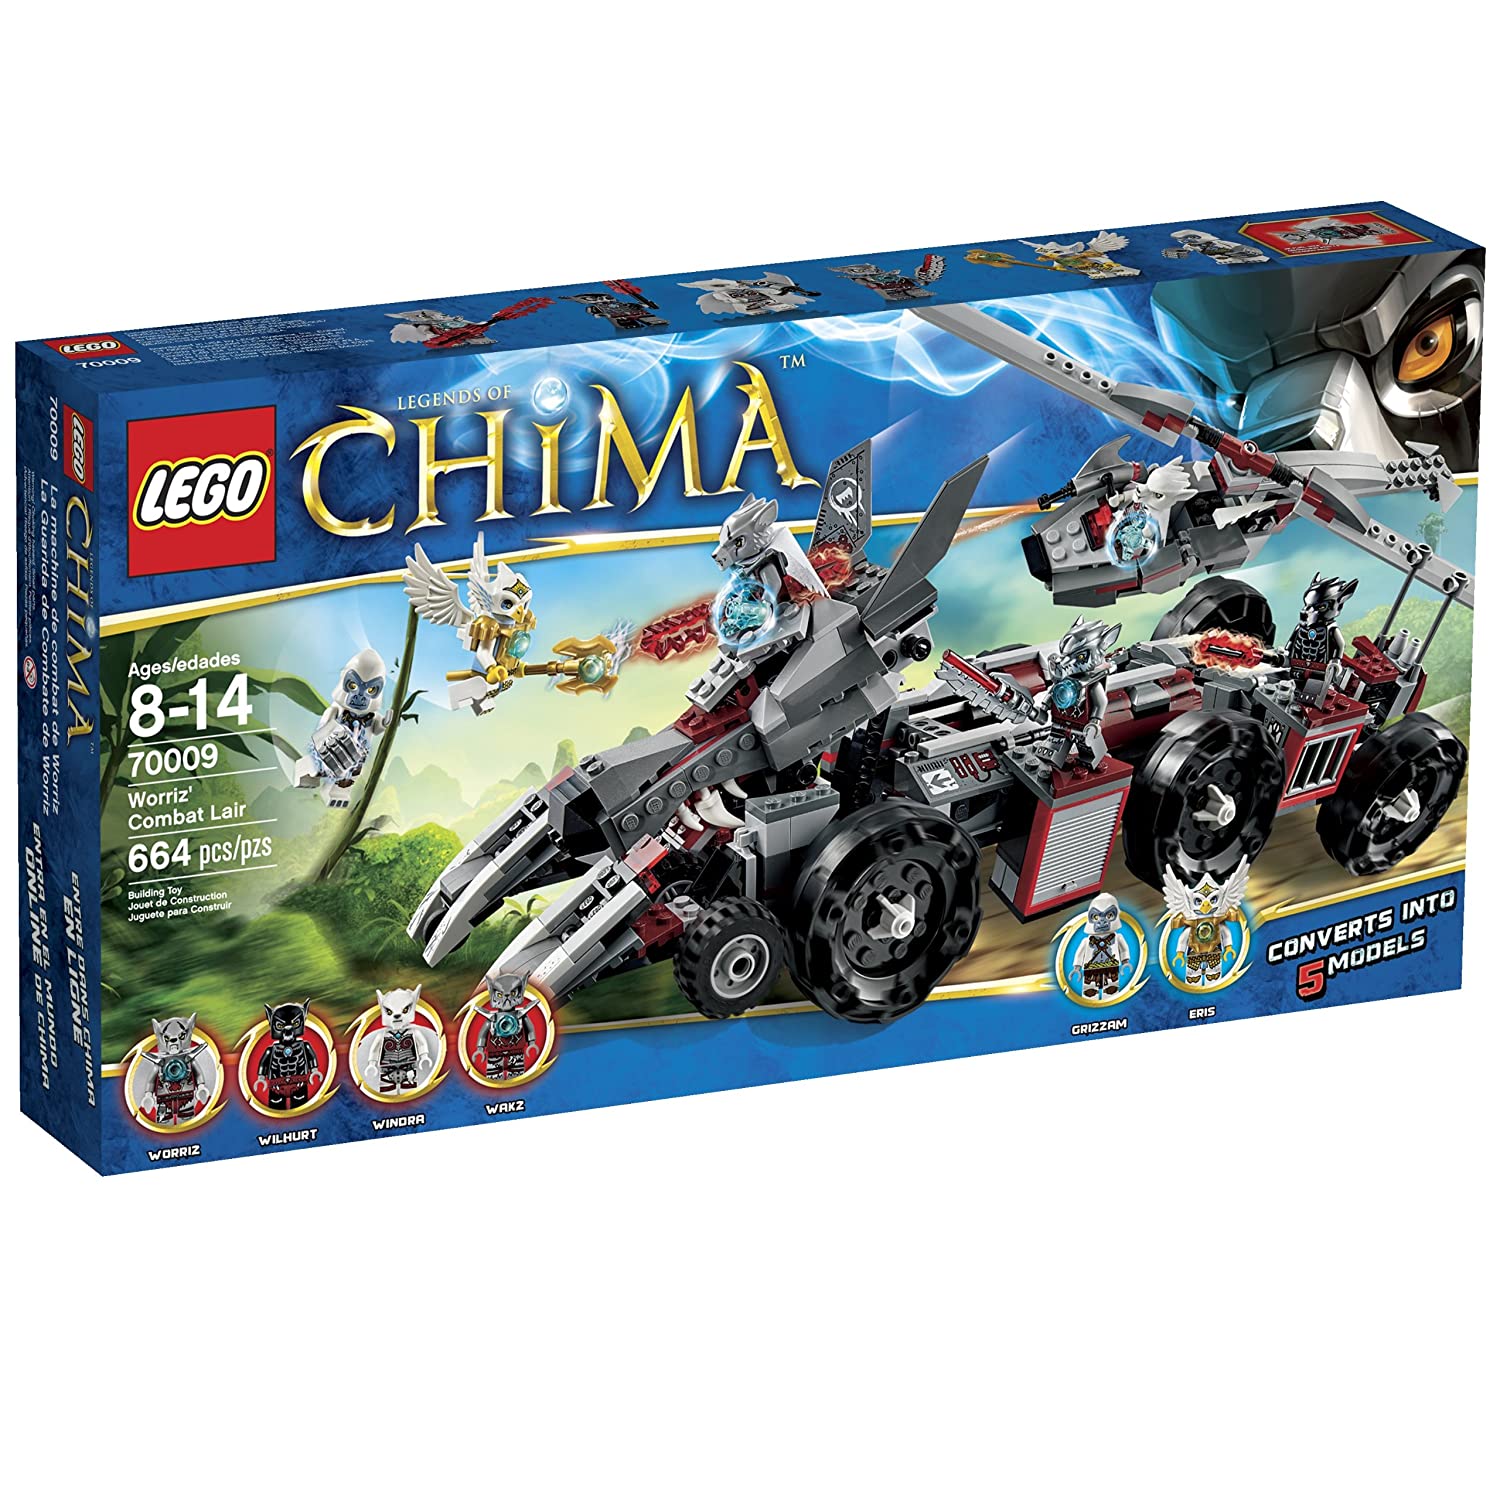 9 Best LEGO Chima Sets 2022 - Buying Guide & Reviews 8